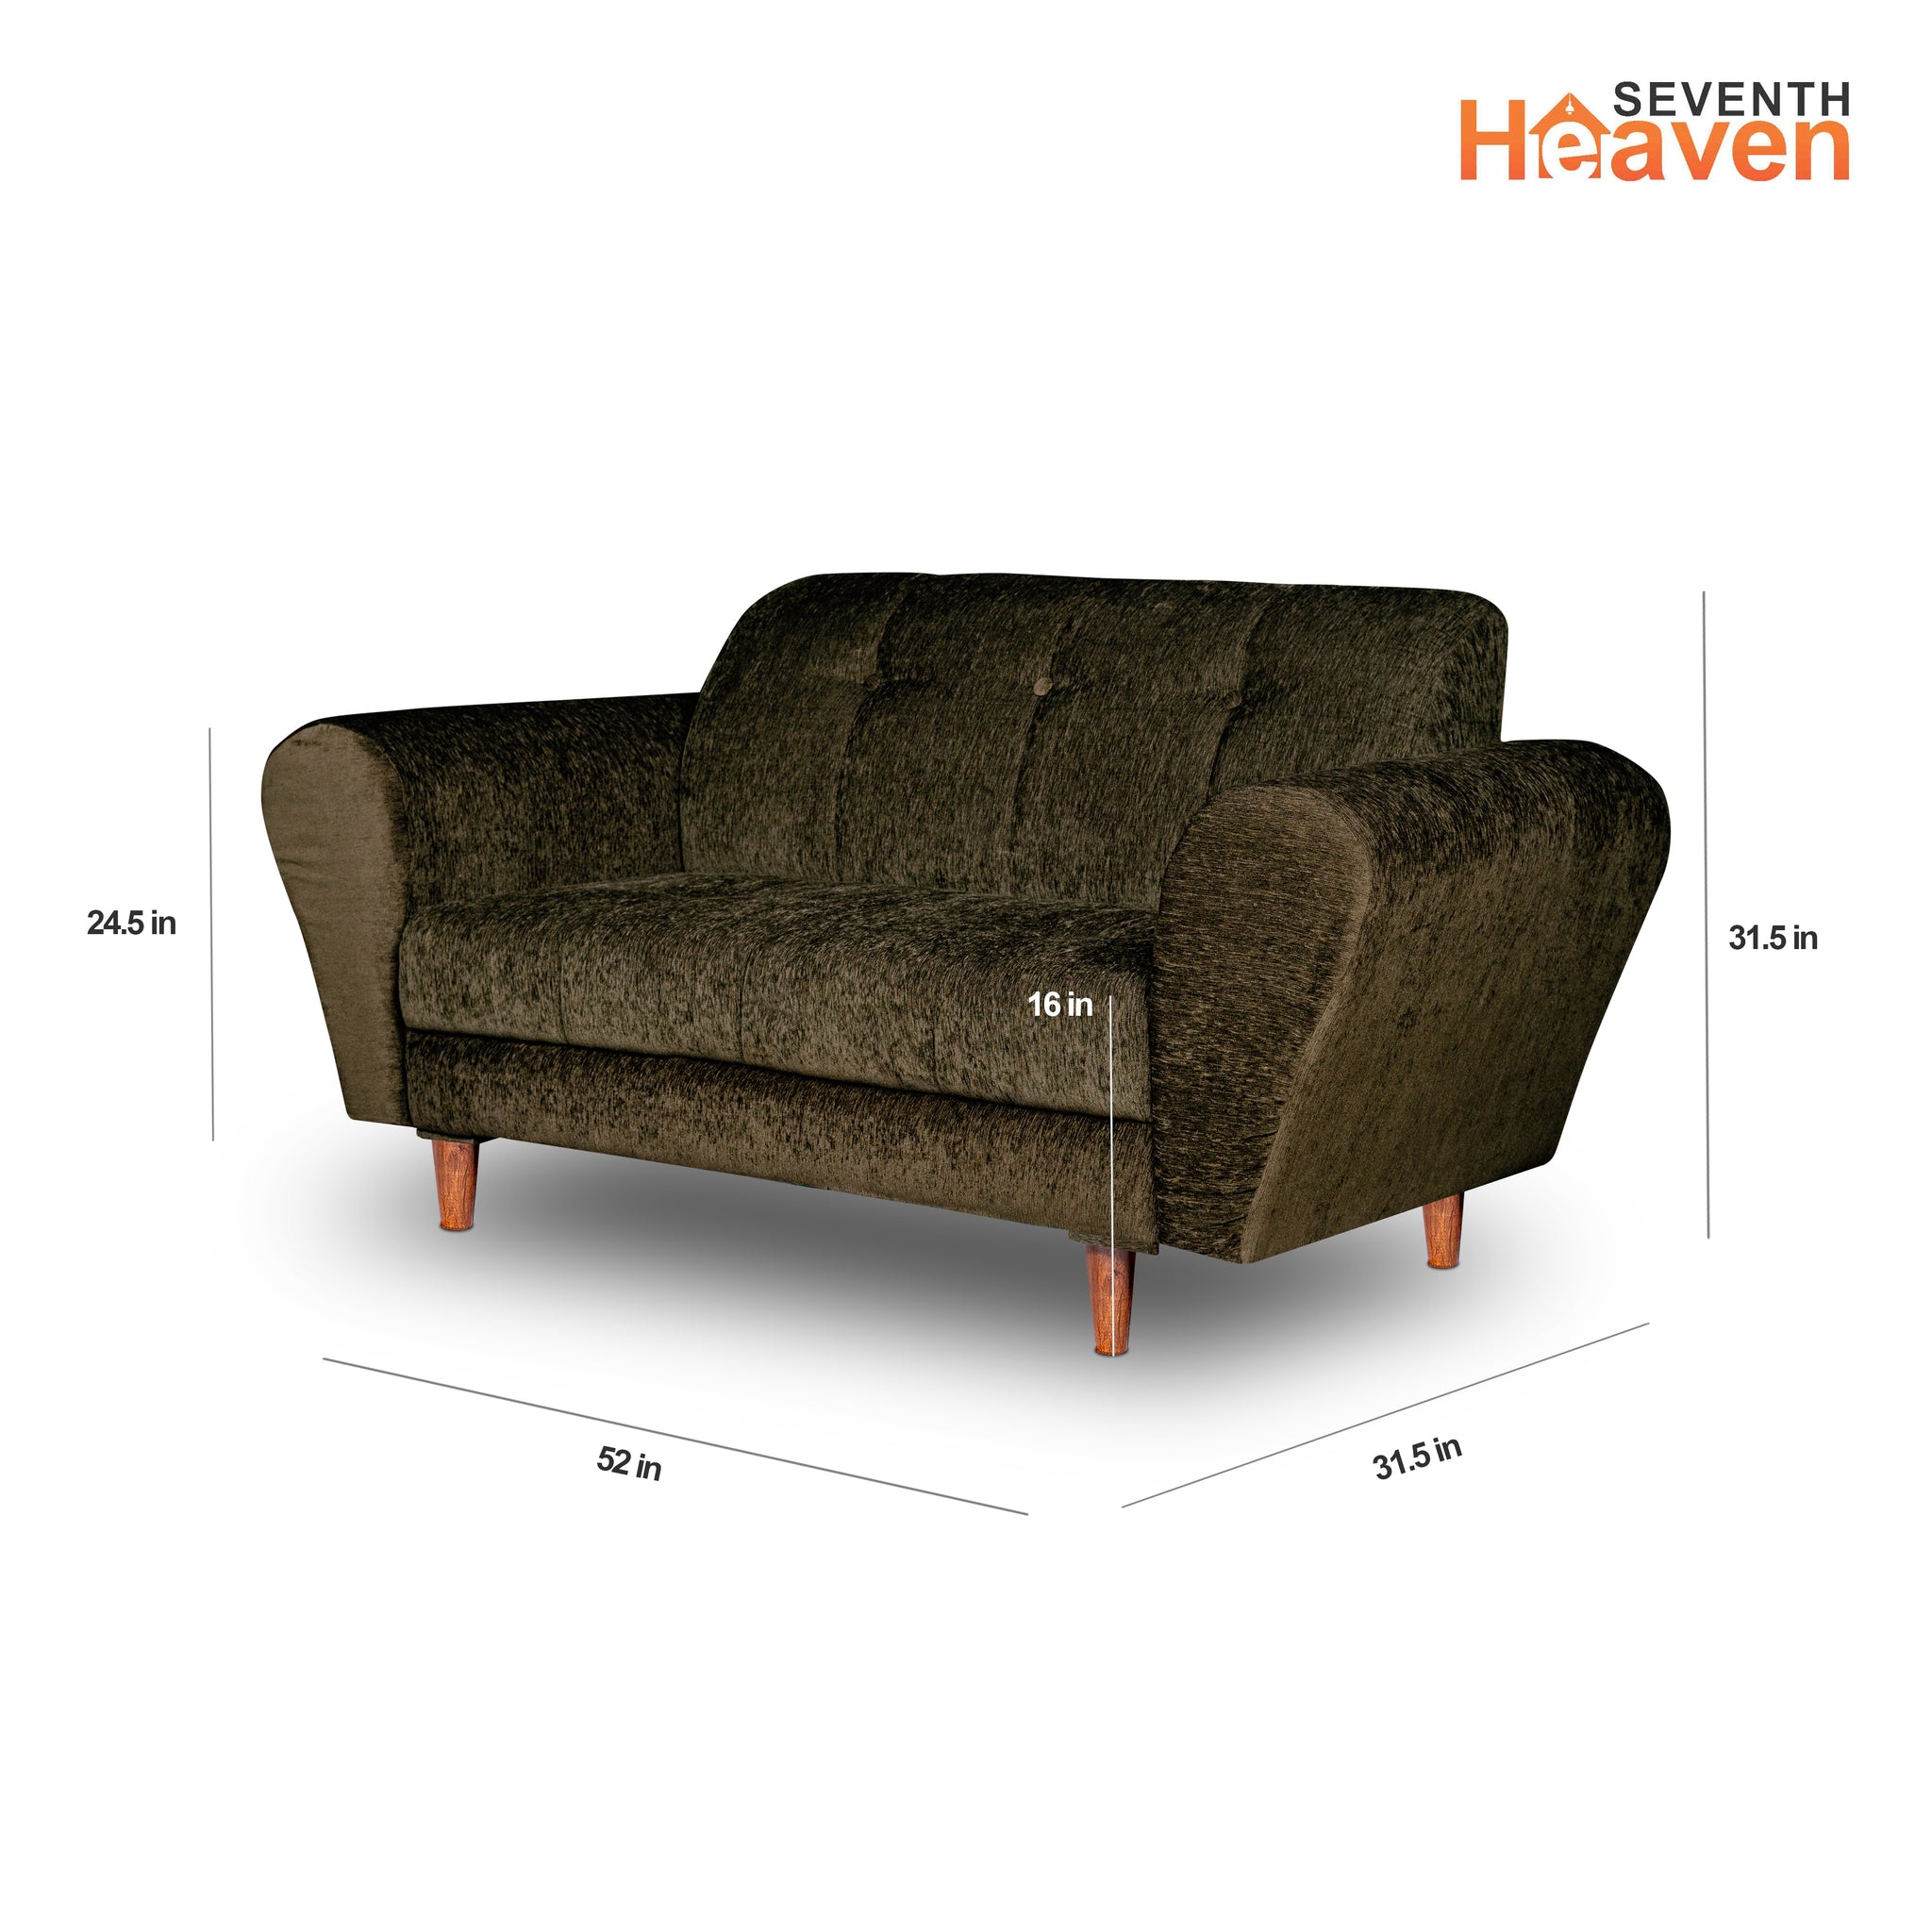 Seventh Heaven Milan 2 Seater Wooden Sofa Set Modern & Elegant Smart Furniture Range for luxurious homes, living rooms and offices. Green Colour Molphino fabric with sheesham polished wooden legs.Product dimensions are also mentioned.